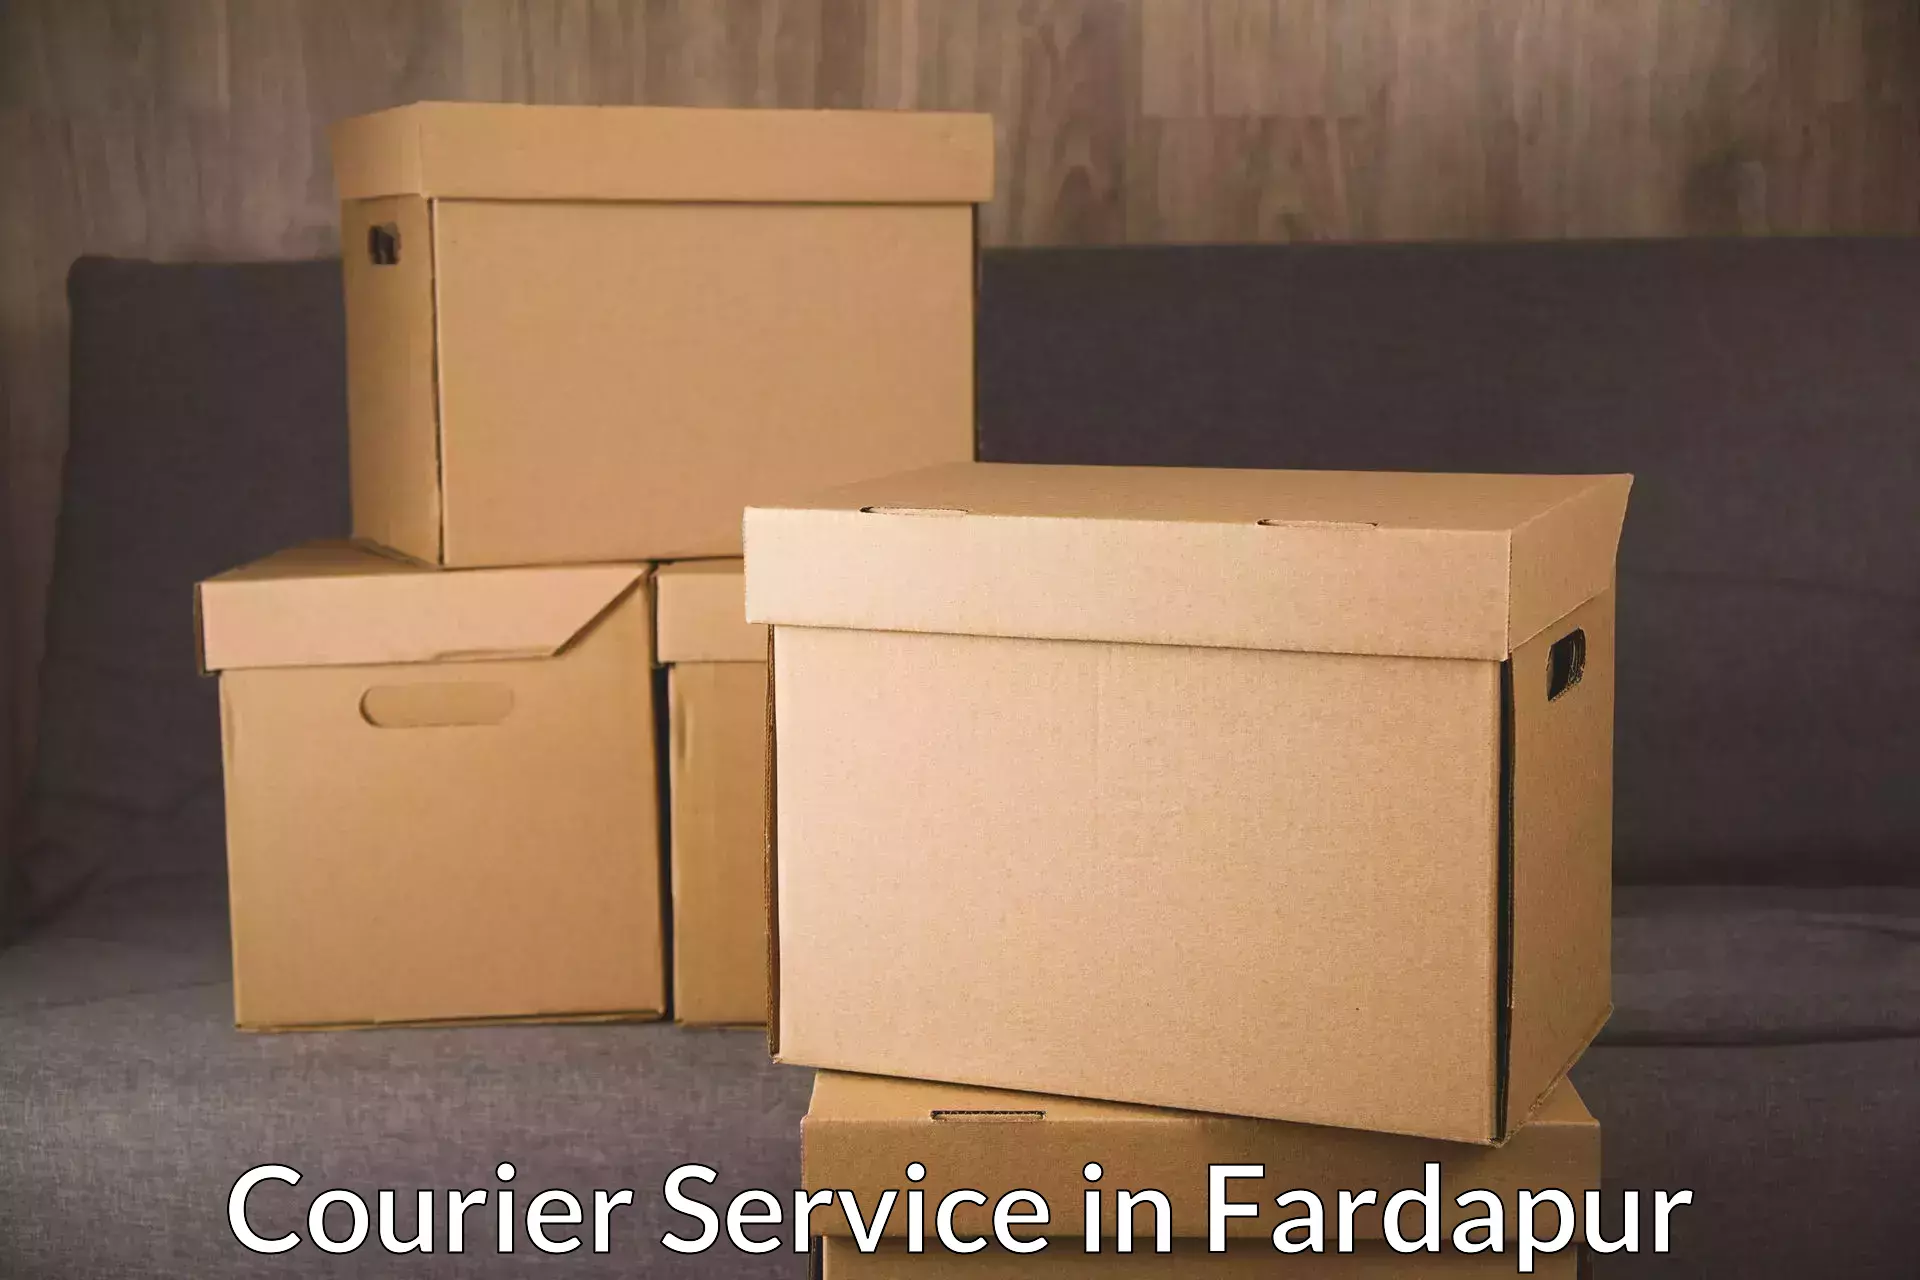 Business shipping needs in Fardapur